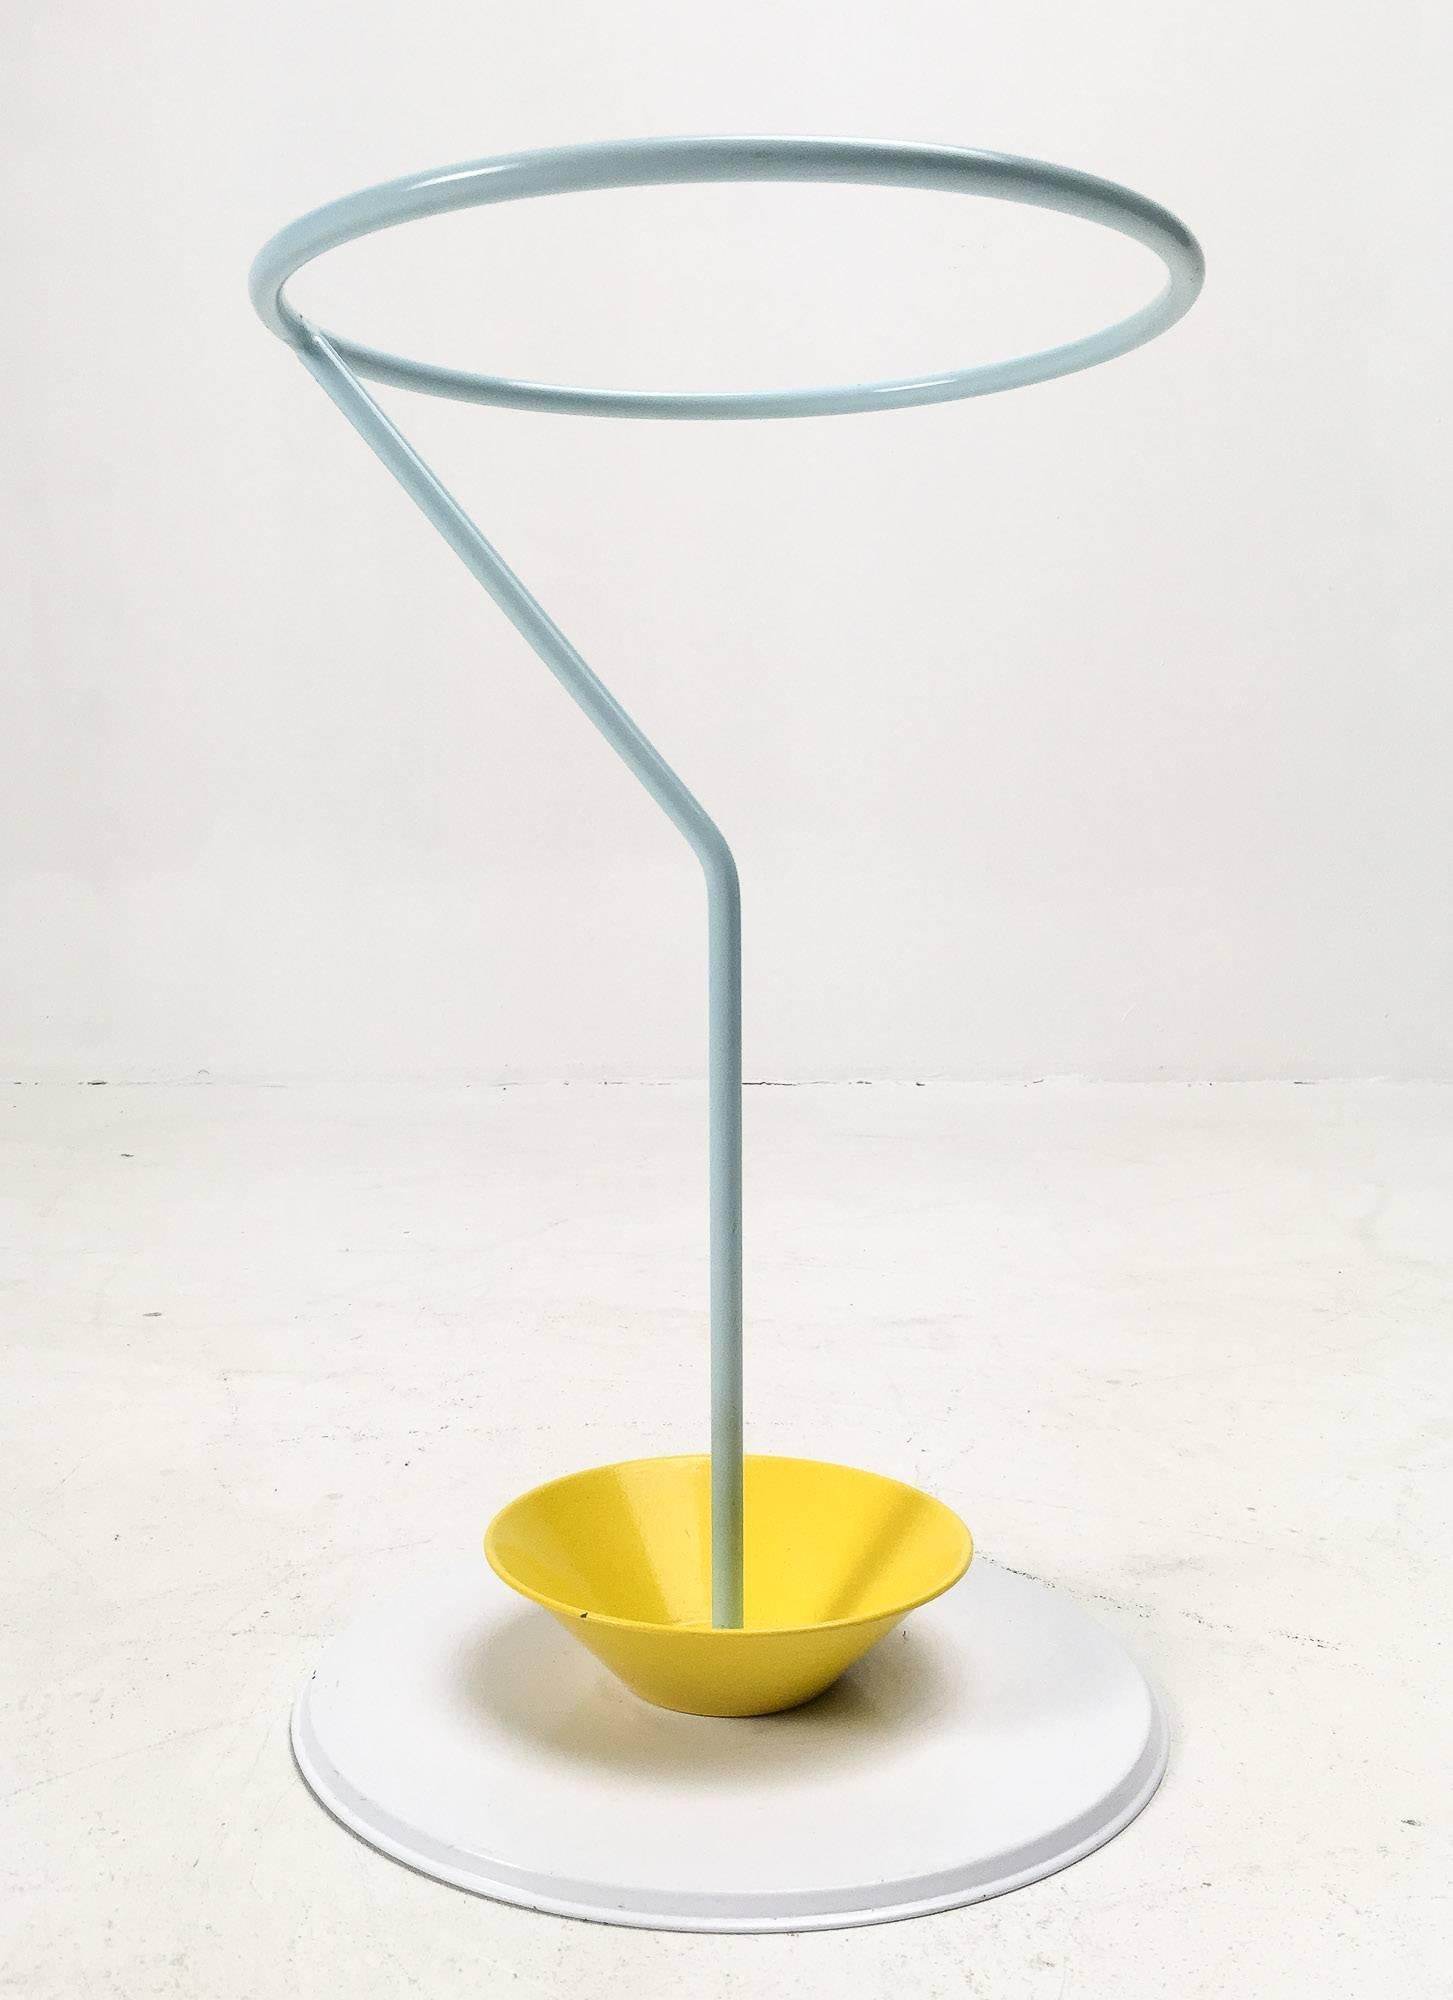 Umbrella stand designed in 1982 by Piero de Longhi for Fly Line.
Clearly inspired by the Memphis movement.